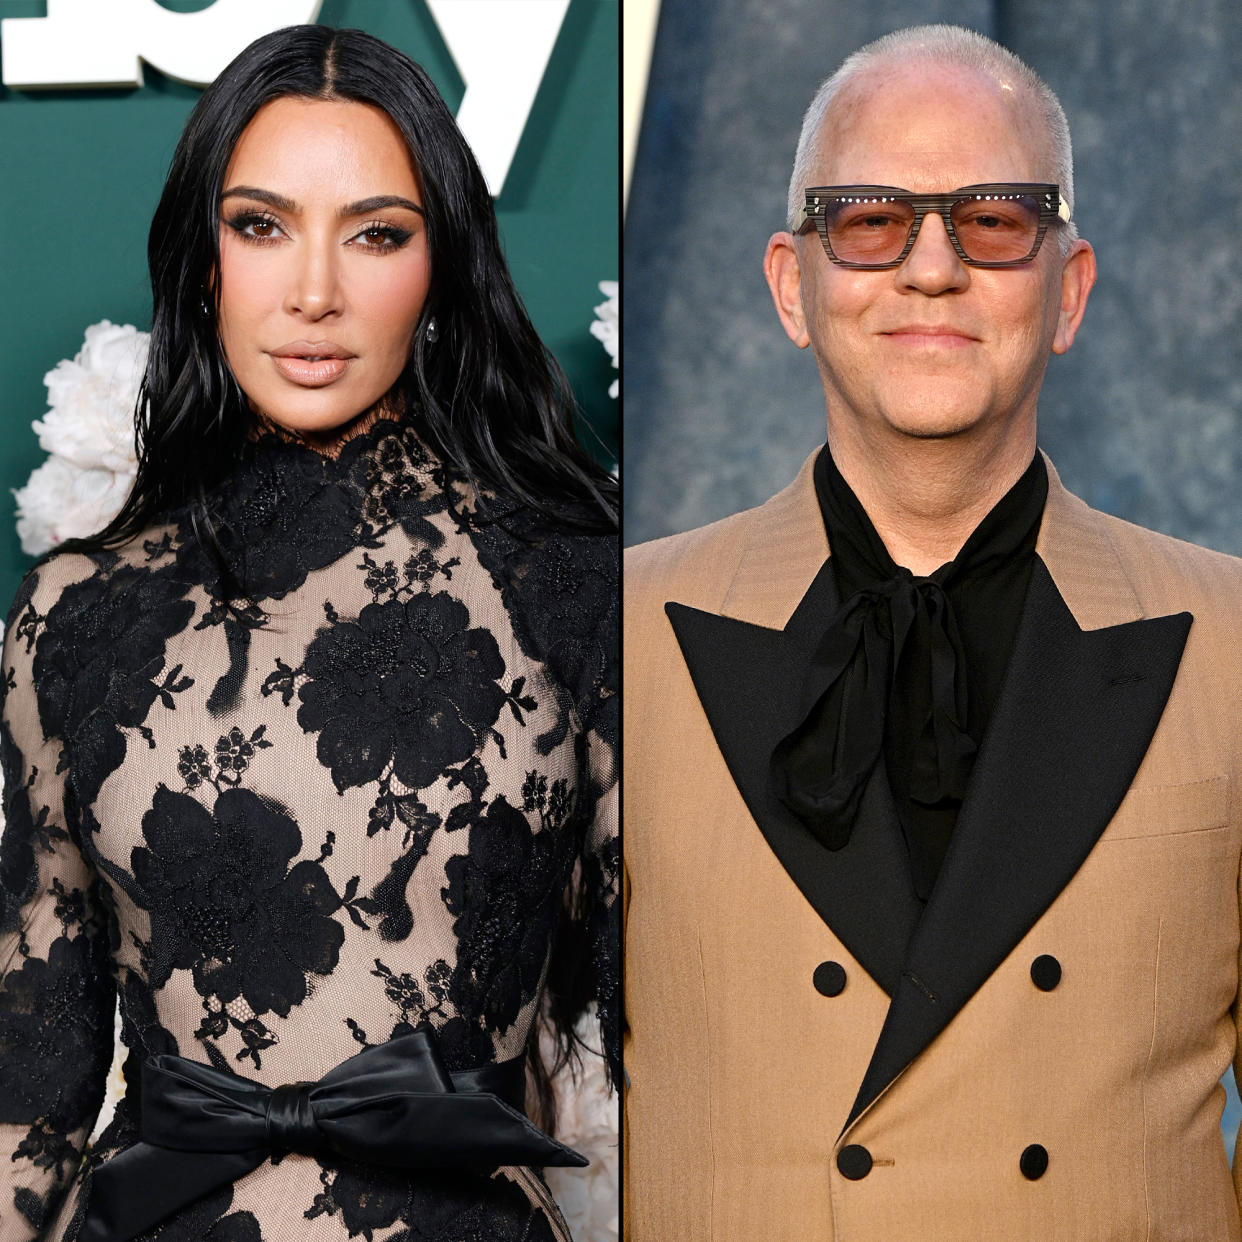 Kim Kardashian and Other ‘AHS,’ ‘Feud’ and ‘Dahmer’ Stars Narrate Ryan Murphy’s Bel Air House Tour